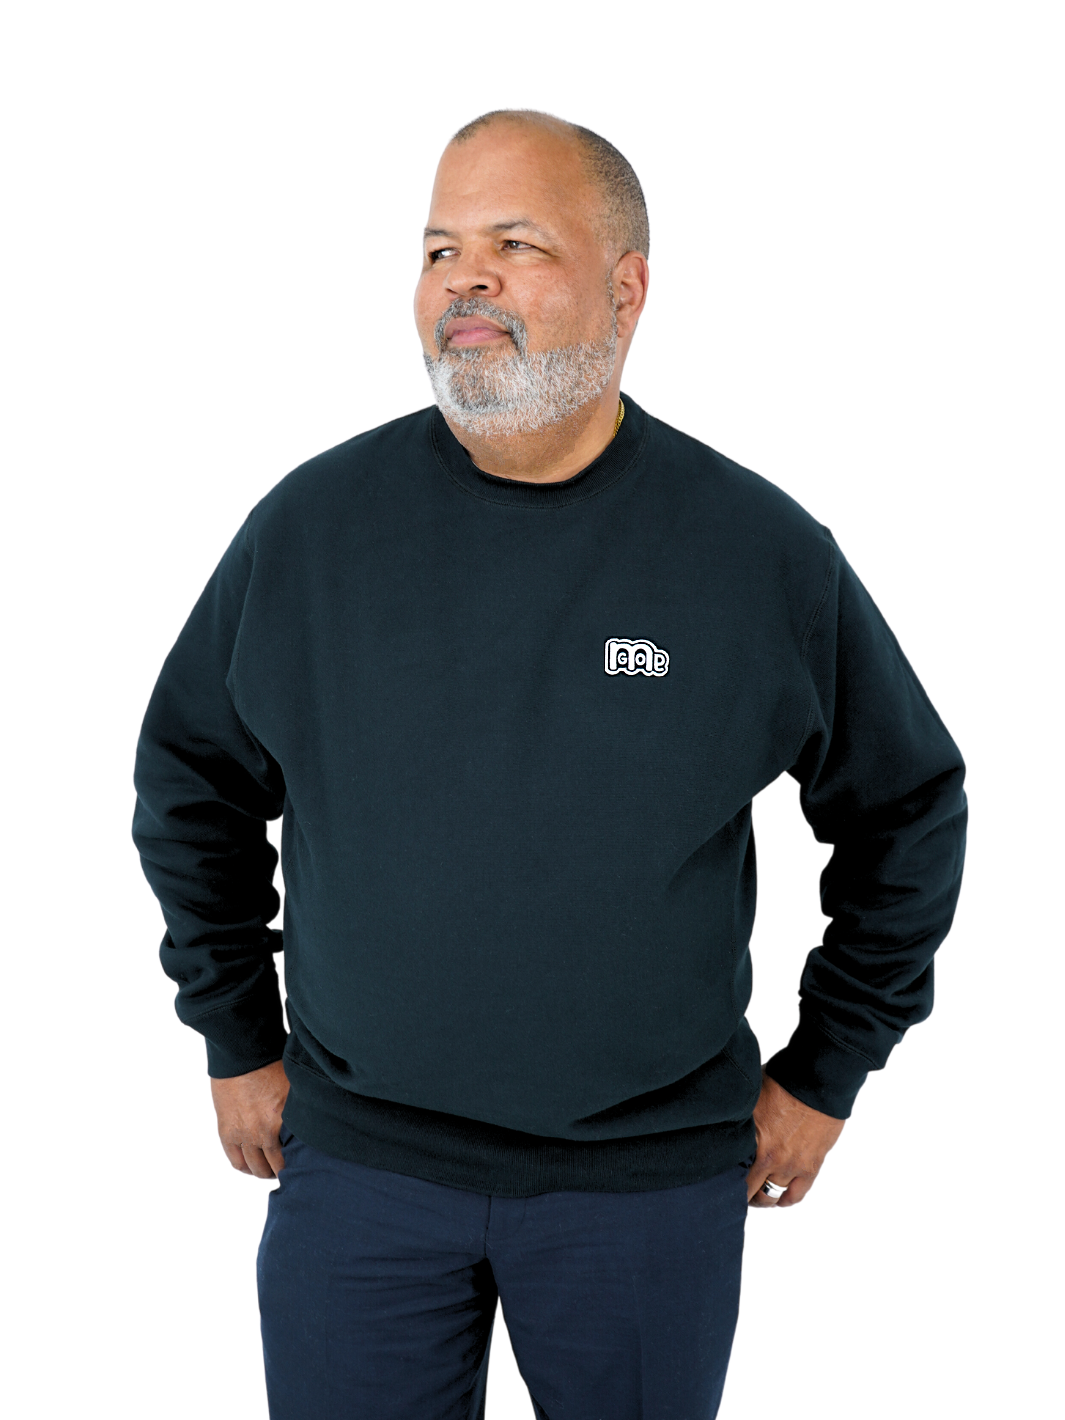 Luxury Black Crewneck with premium cross grain design to ensure long-lasting comfort and wear. Featuring logo at left front and GODinme on the back.